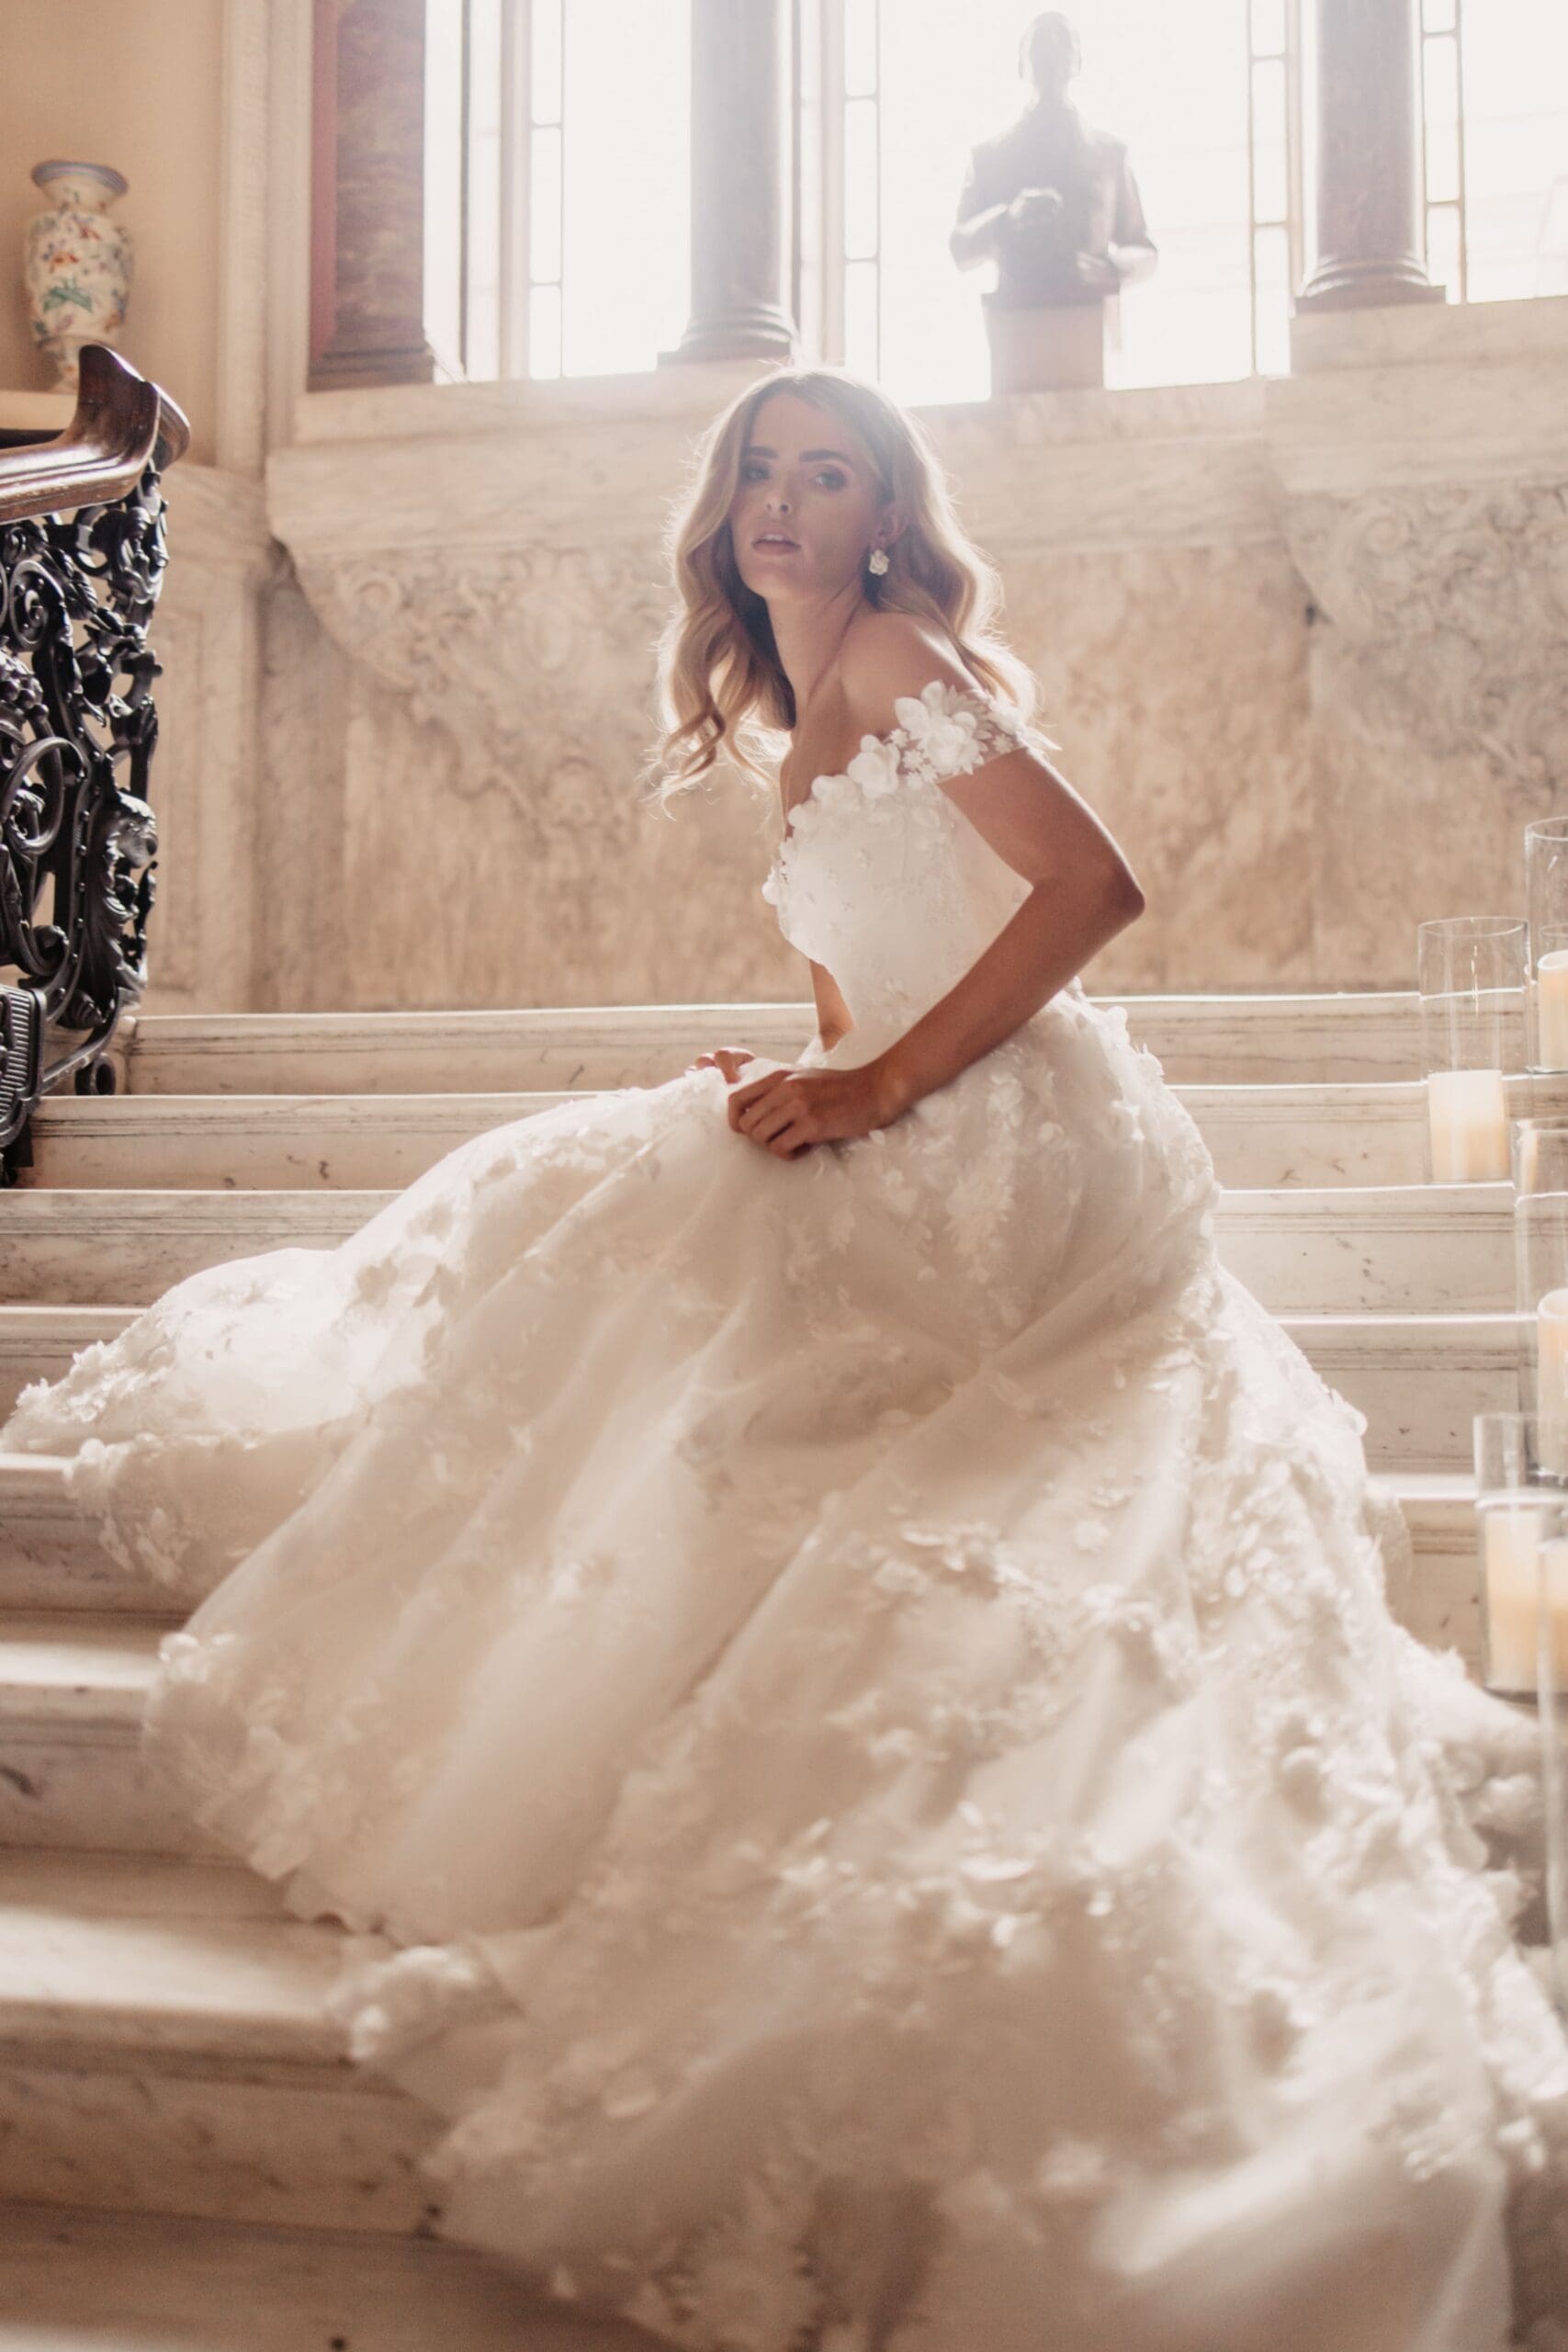 We offer a relaxed yet personal approach to finding your perfect gown at our bridal shop in Harrogate. Click to find out more.